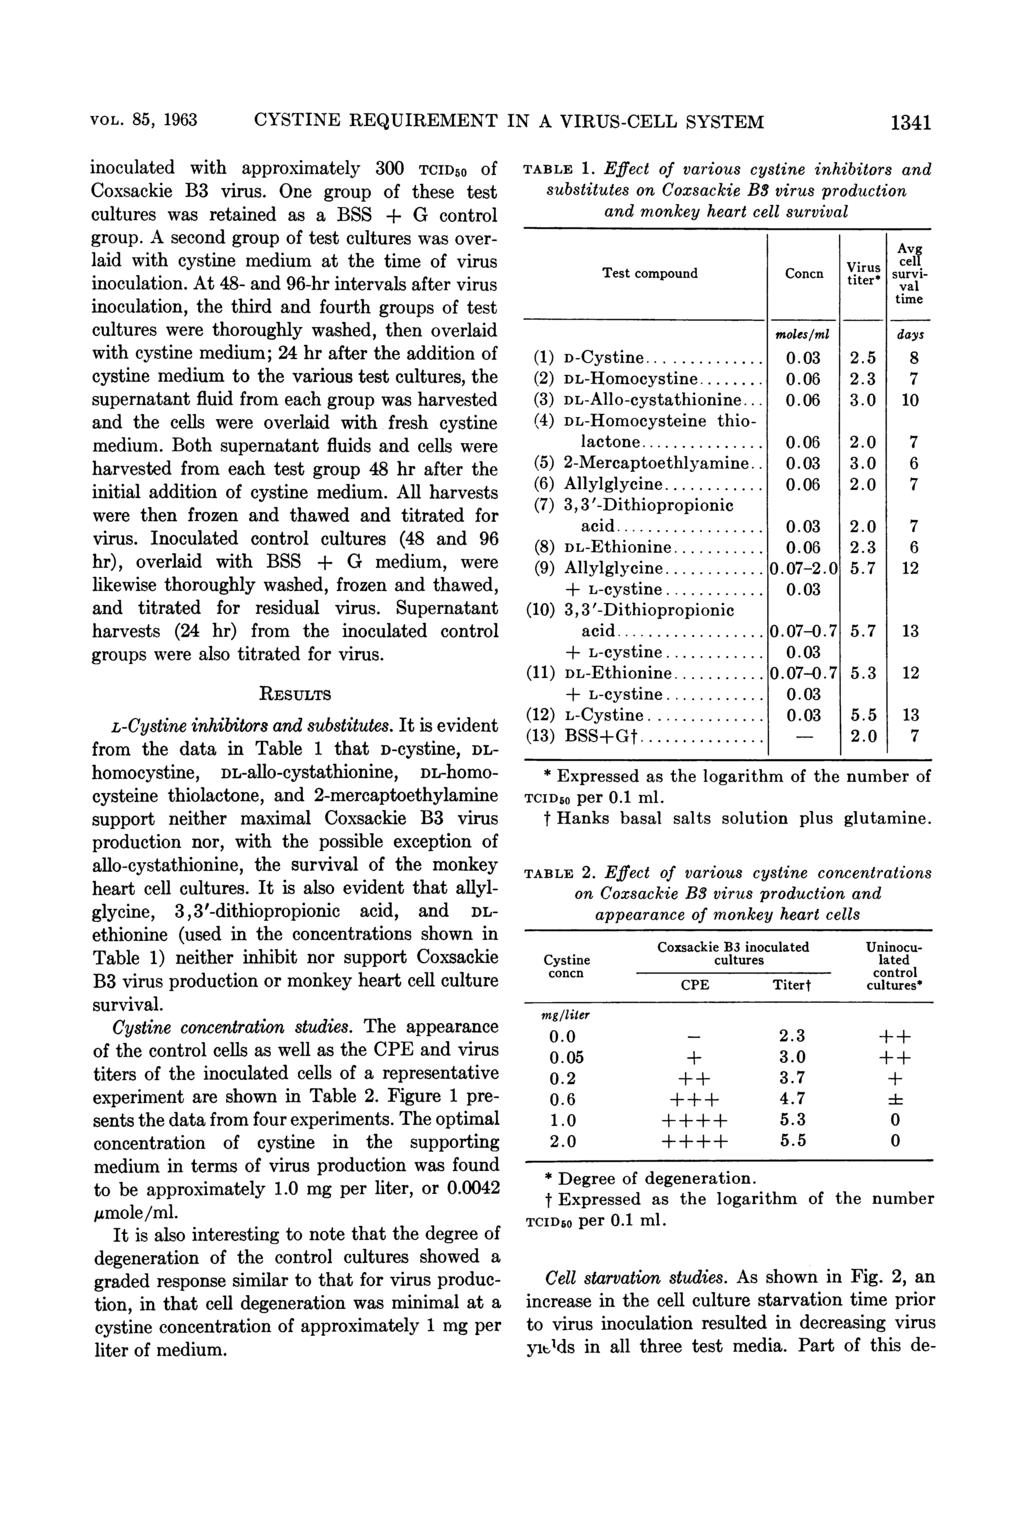 VOL. 85, 1963 CYSTINE REQUIREMENT IN A VIRUS-CELL SYSTEM 1341 inoculated with approximately 300 TCID50 of Coxsackie B3 virus. One group of these test cultures was retained as a BSS + G control group.